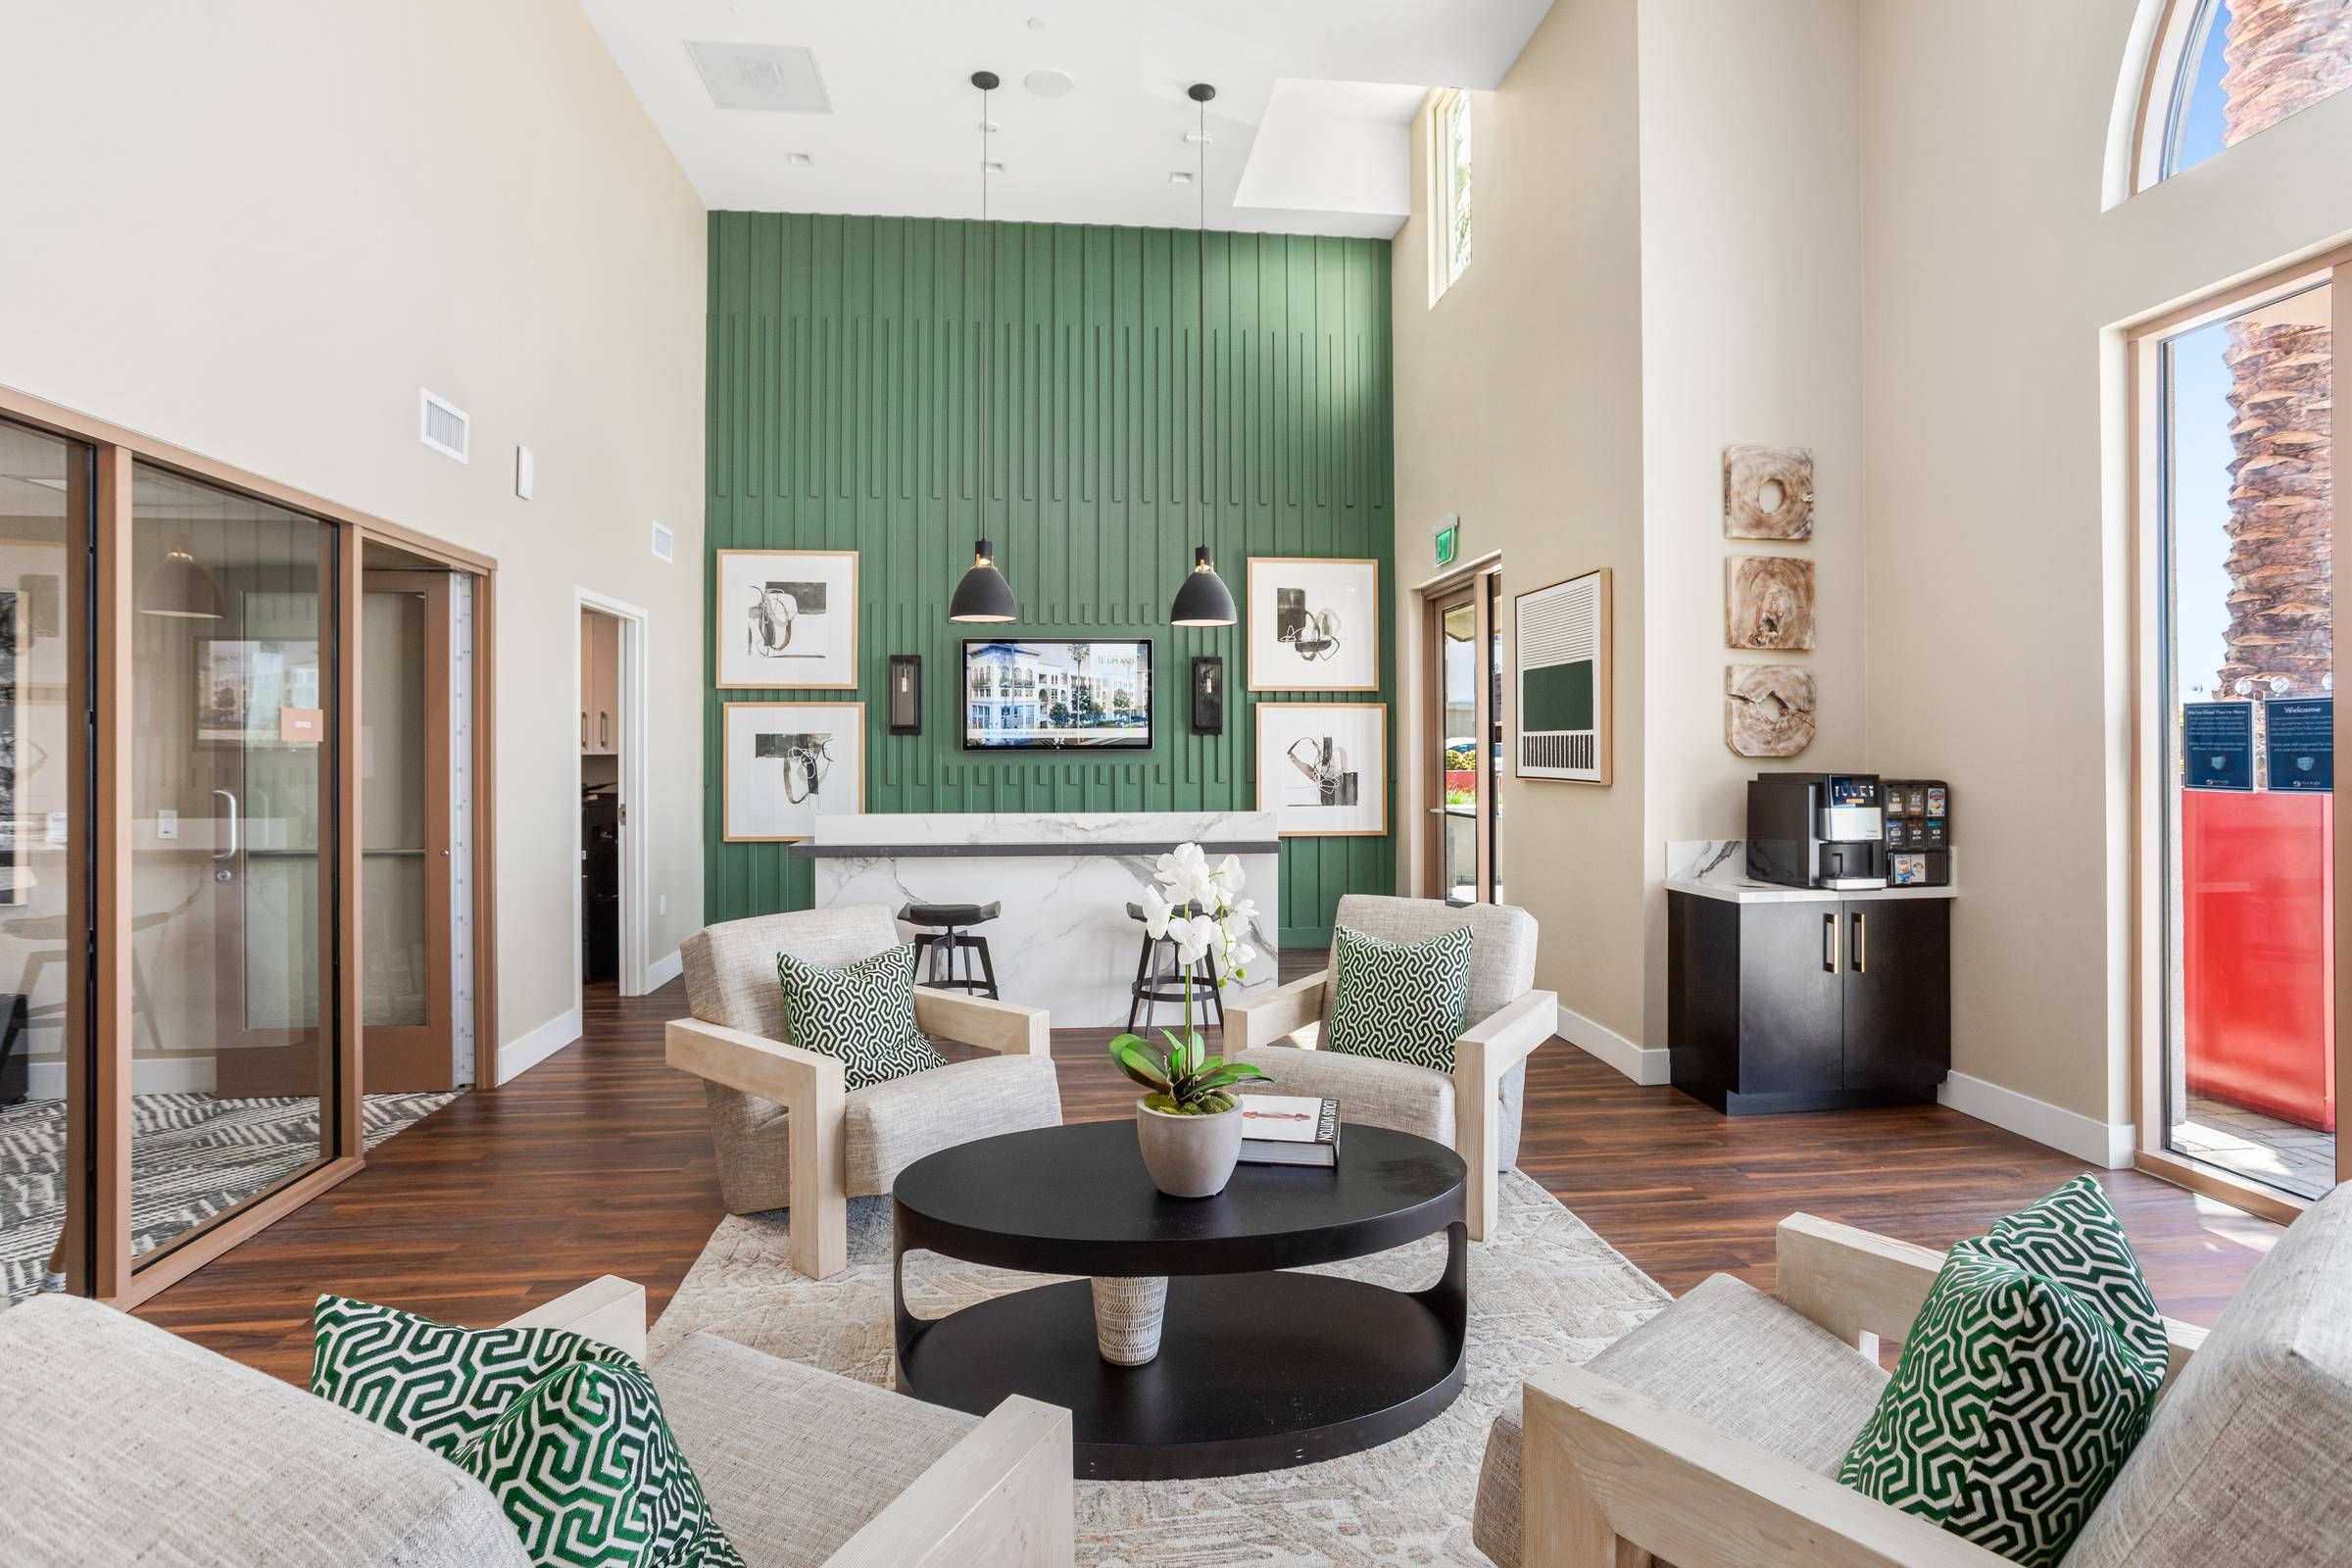 The welcoming lobby of Alta Upland boasts comfortable seating, chic decor, and a marble-topped coffee station against a vibrant green accent wall.